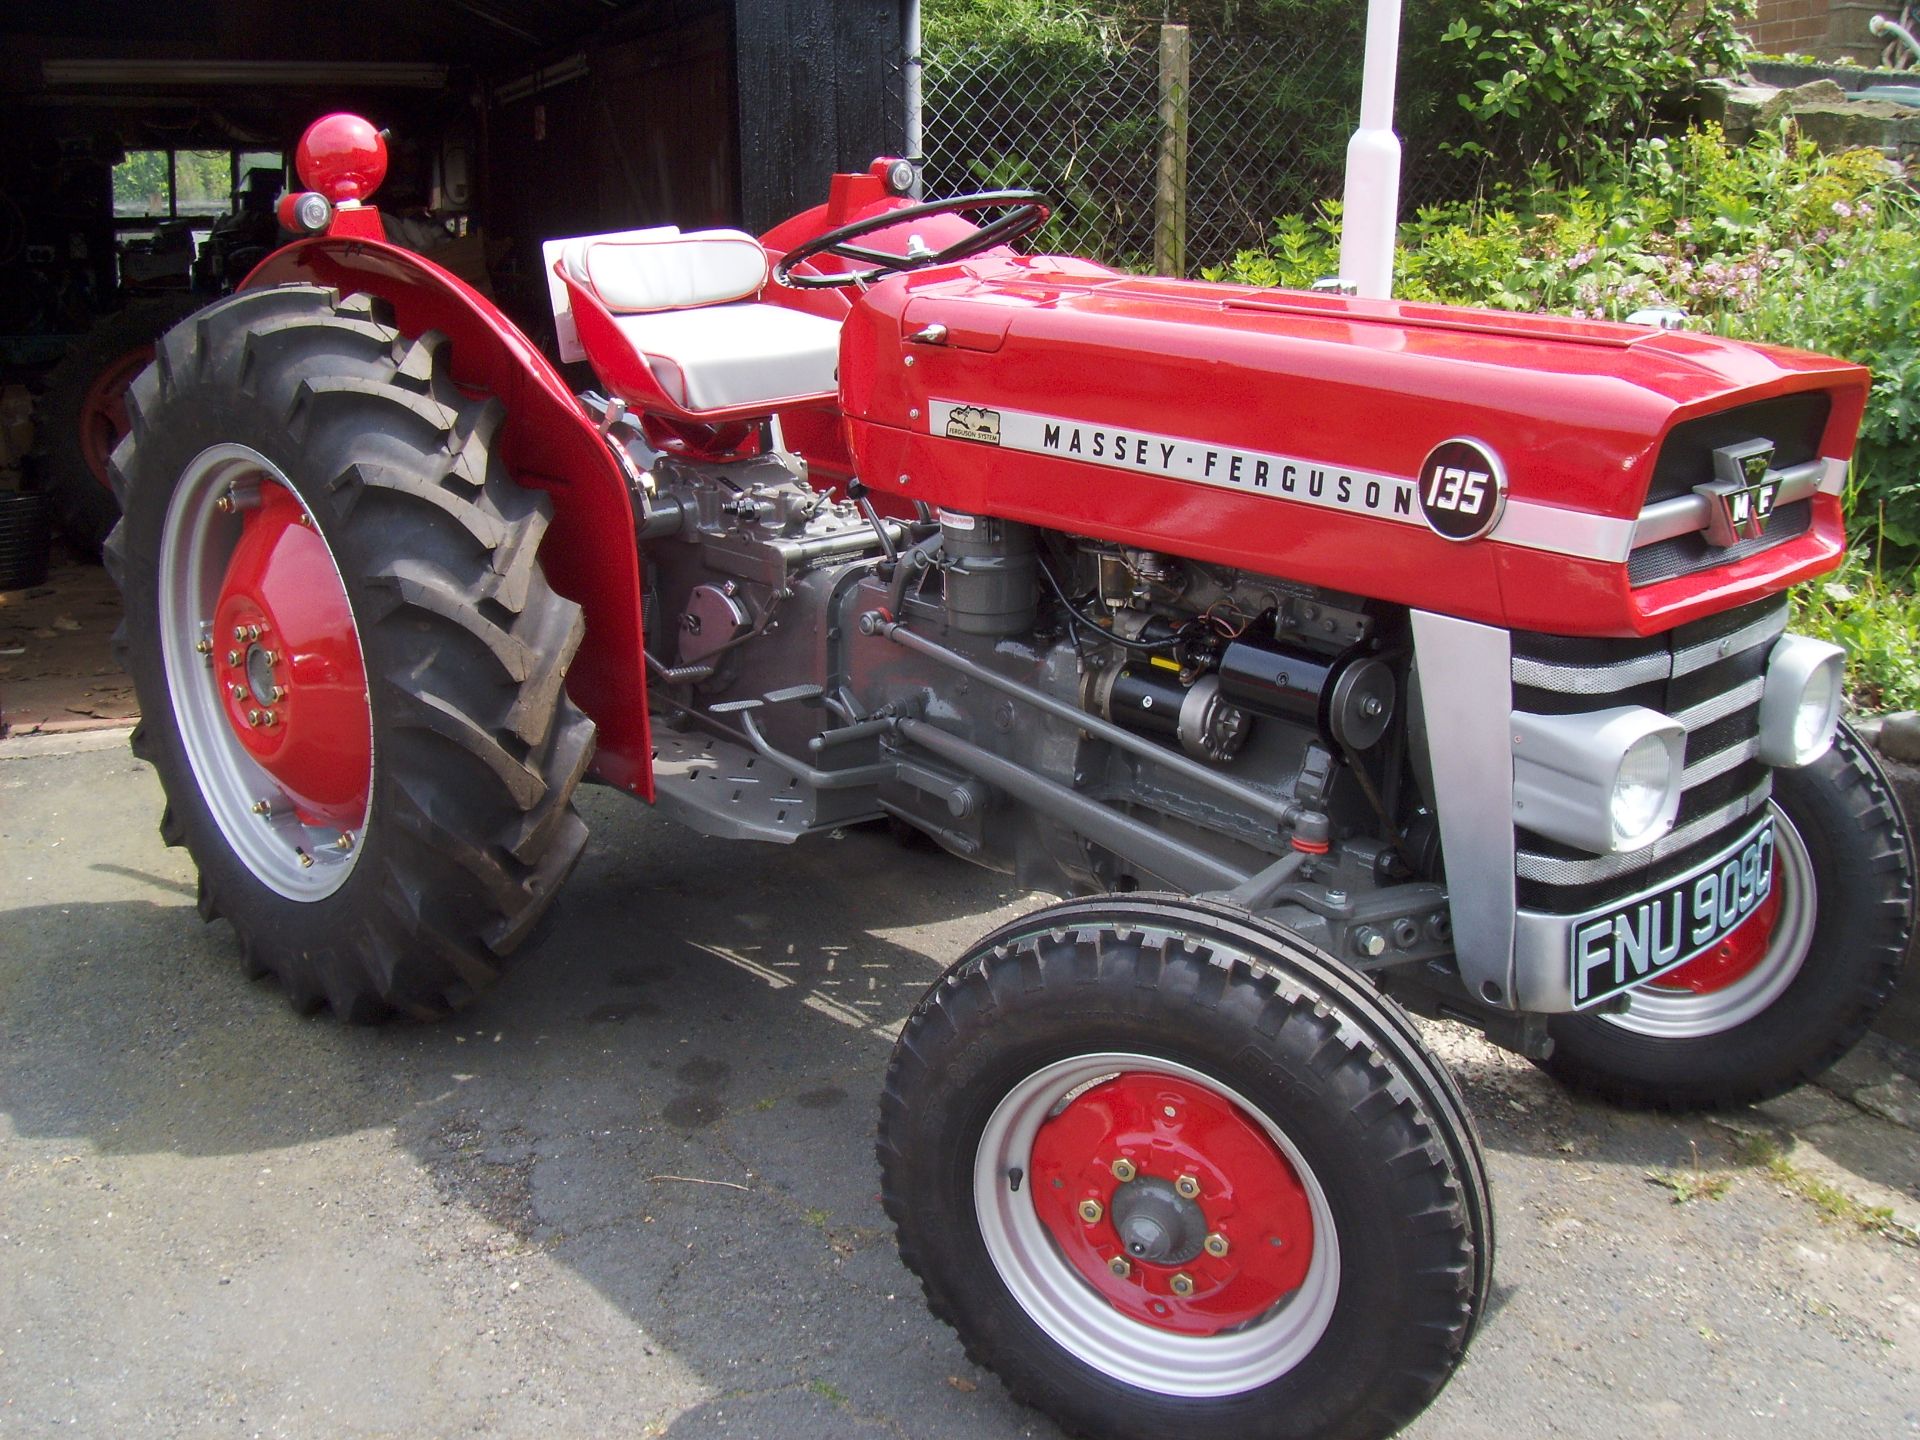 1965 MASSEY FERGUSON 135 3cylinder diesel TRACTOR Reg No: FNU 909C Serial No: 10334 Fitted with full - Image 3 of 3